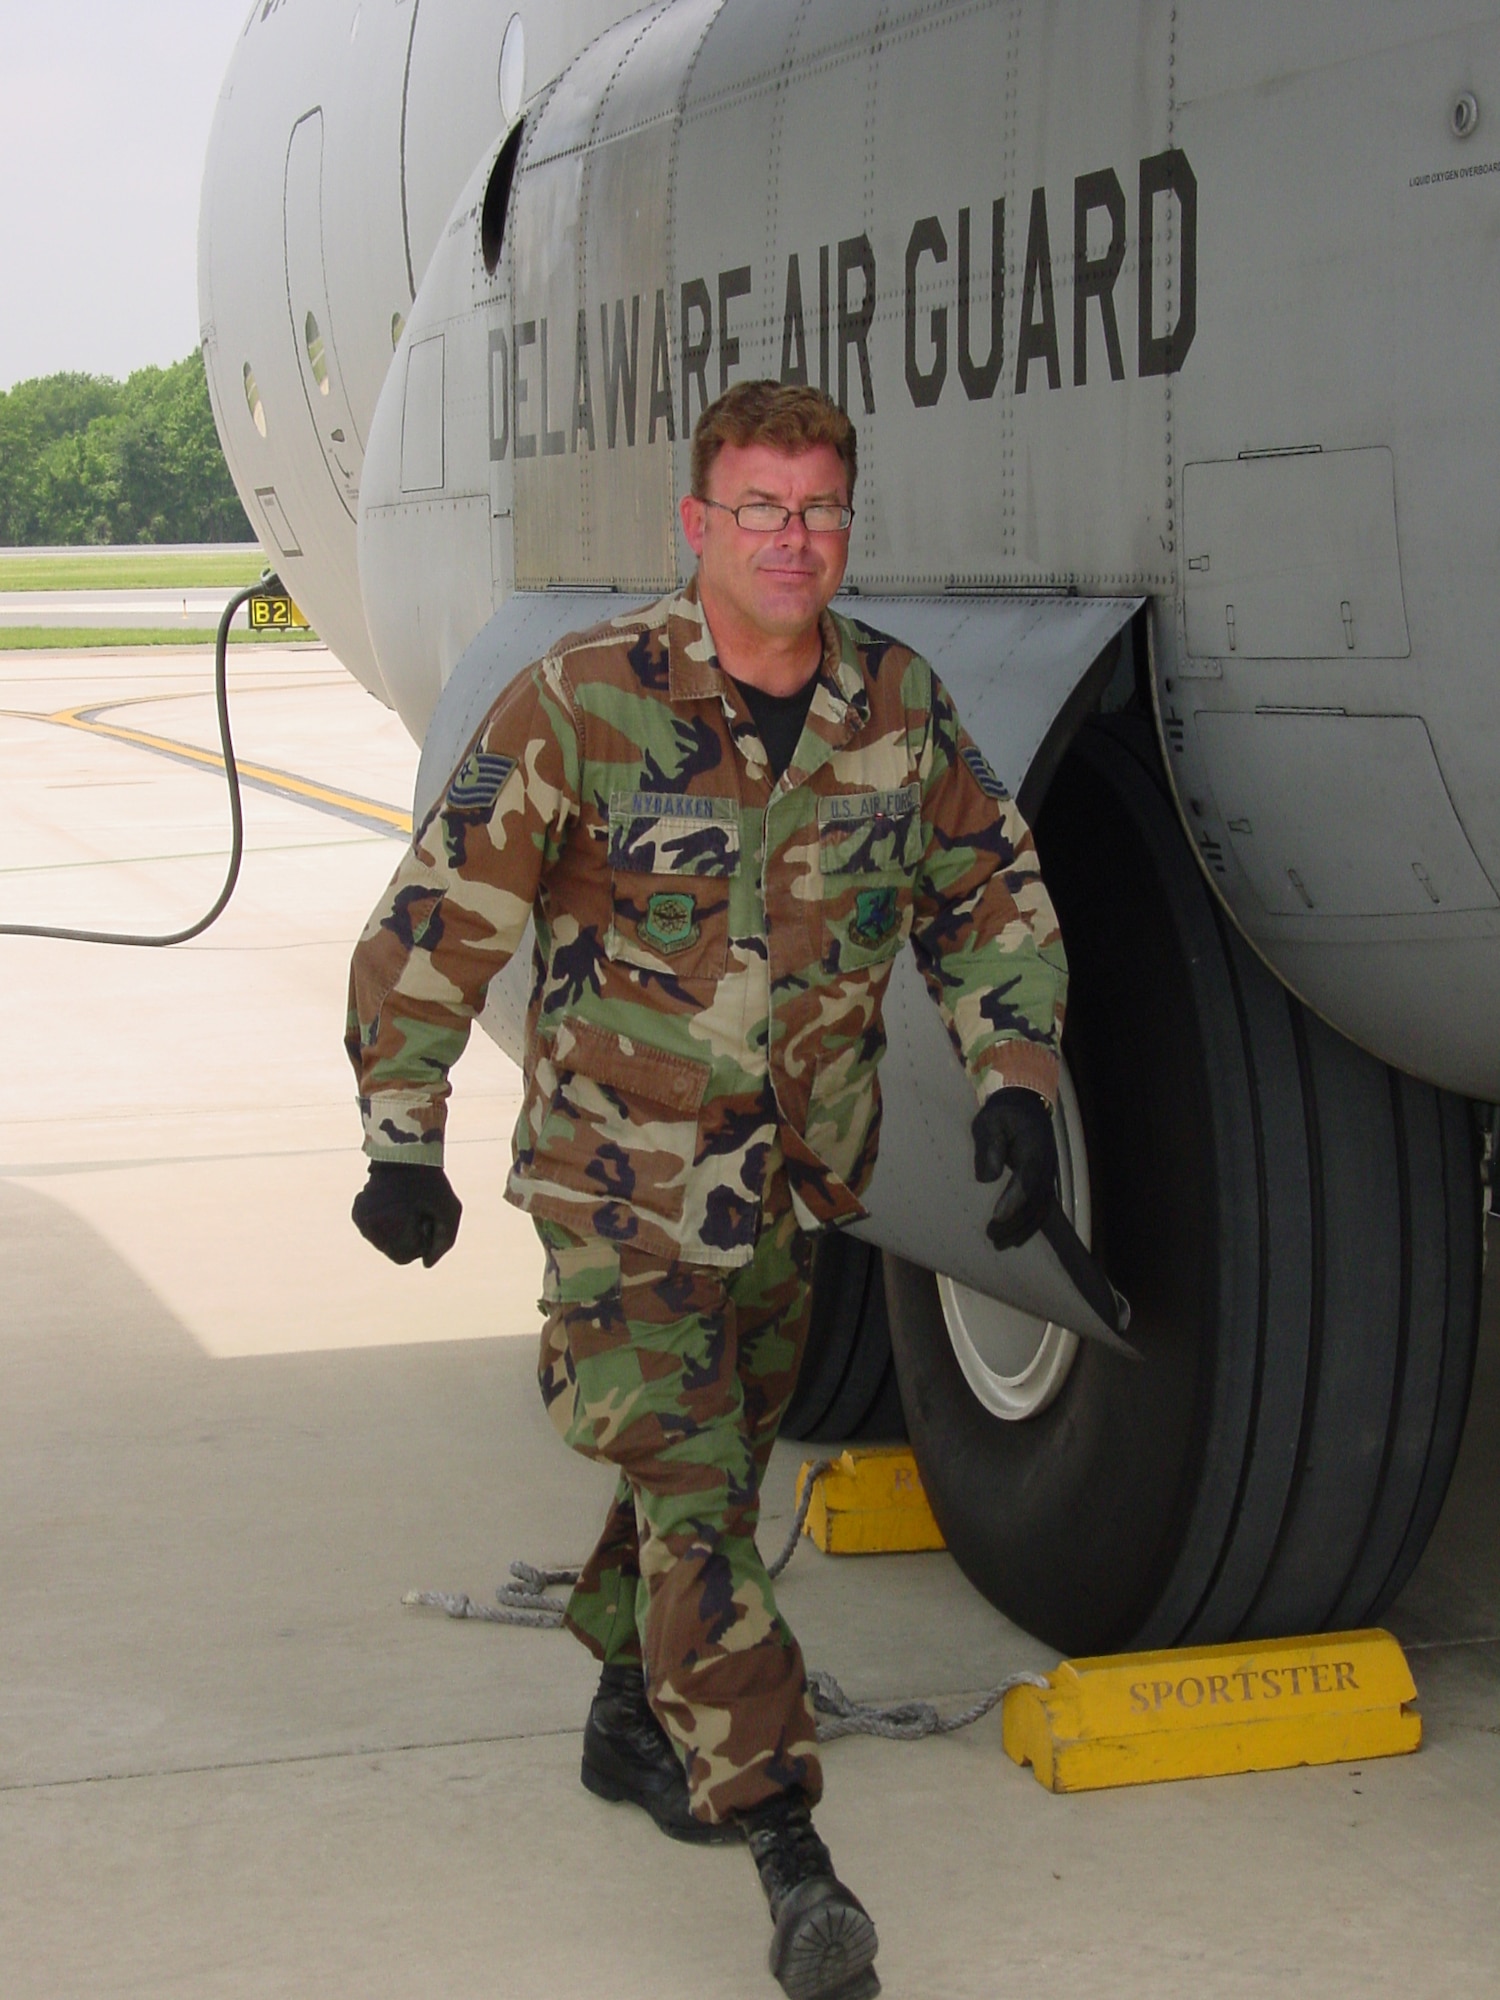 Technical Sgt. Scott Nybakken, crew chief for C-130 aircraft #213, Delaware Air National Guard, continues on to another post-flight task after the aircraft became the first in the unit's C-130H fleet to reach the 10,000 hour flying milestone on June 5, 2008.   